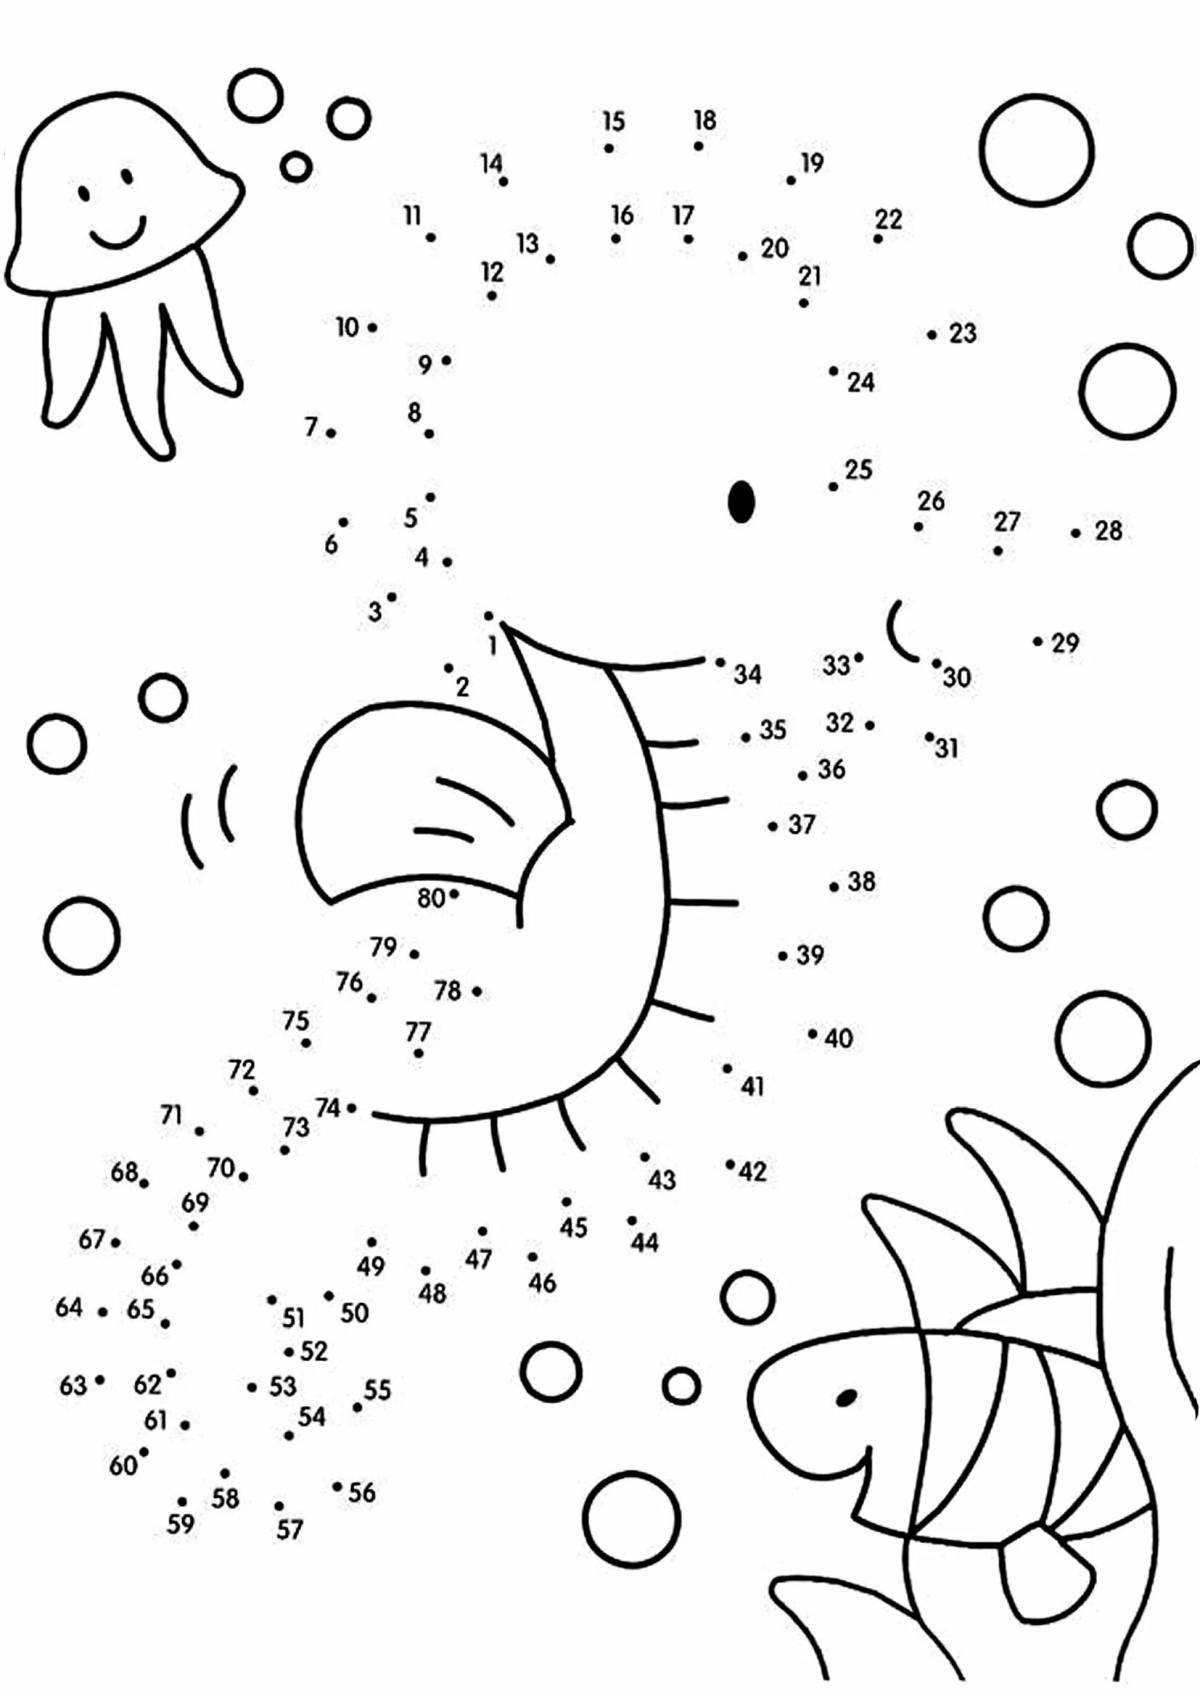 Connect by numbers bright coloring page